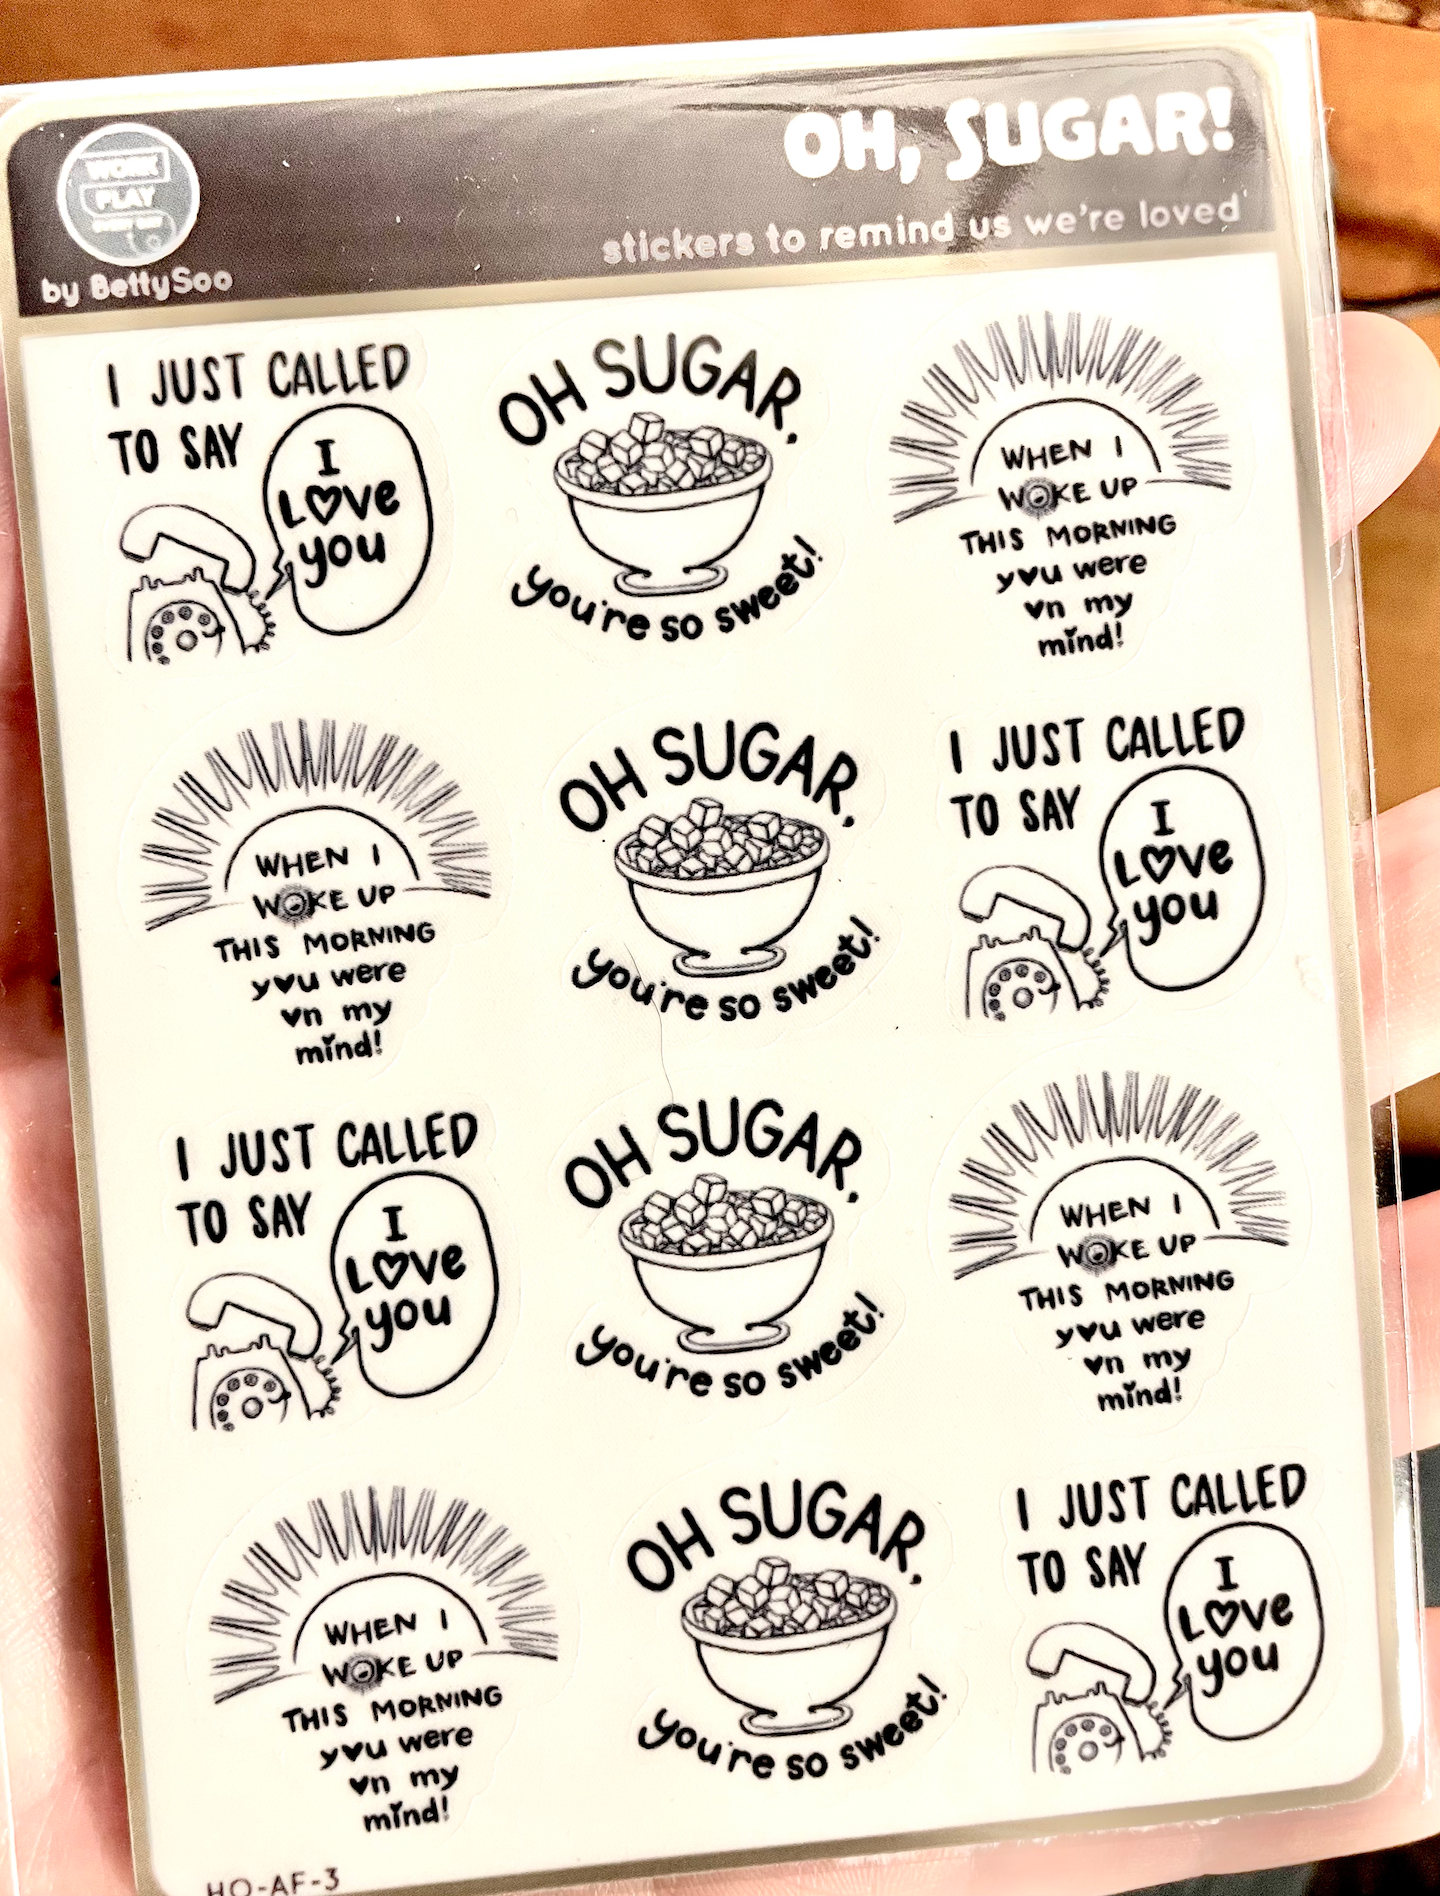 Affirmation Sticker Combo 2 (Translucent, Clear Gloss, or Holographic) –  Work Play Every Day